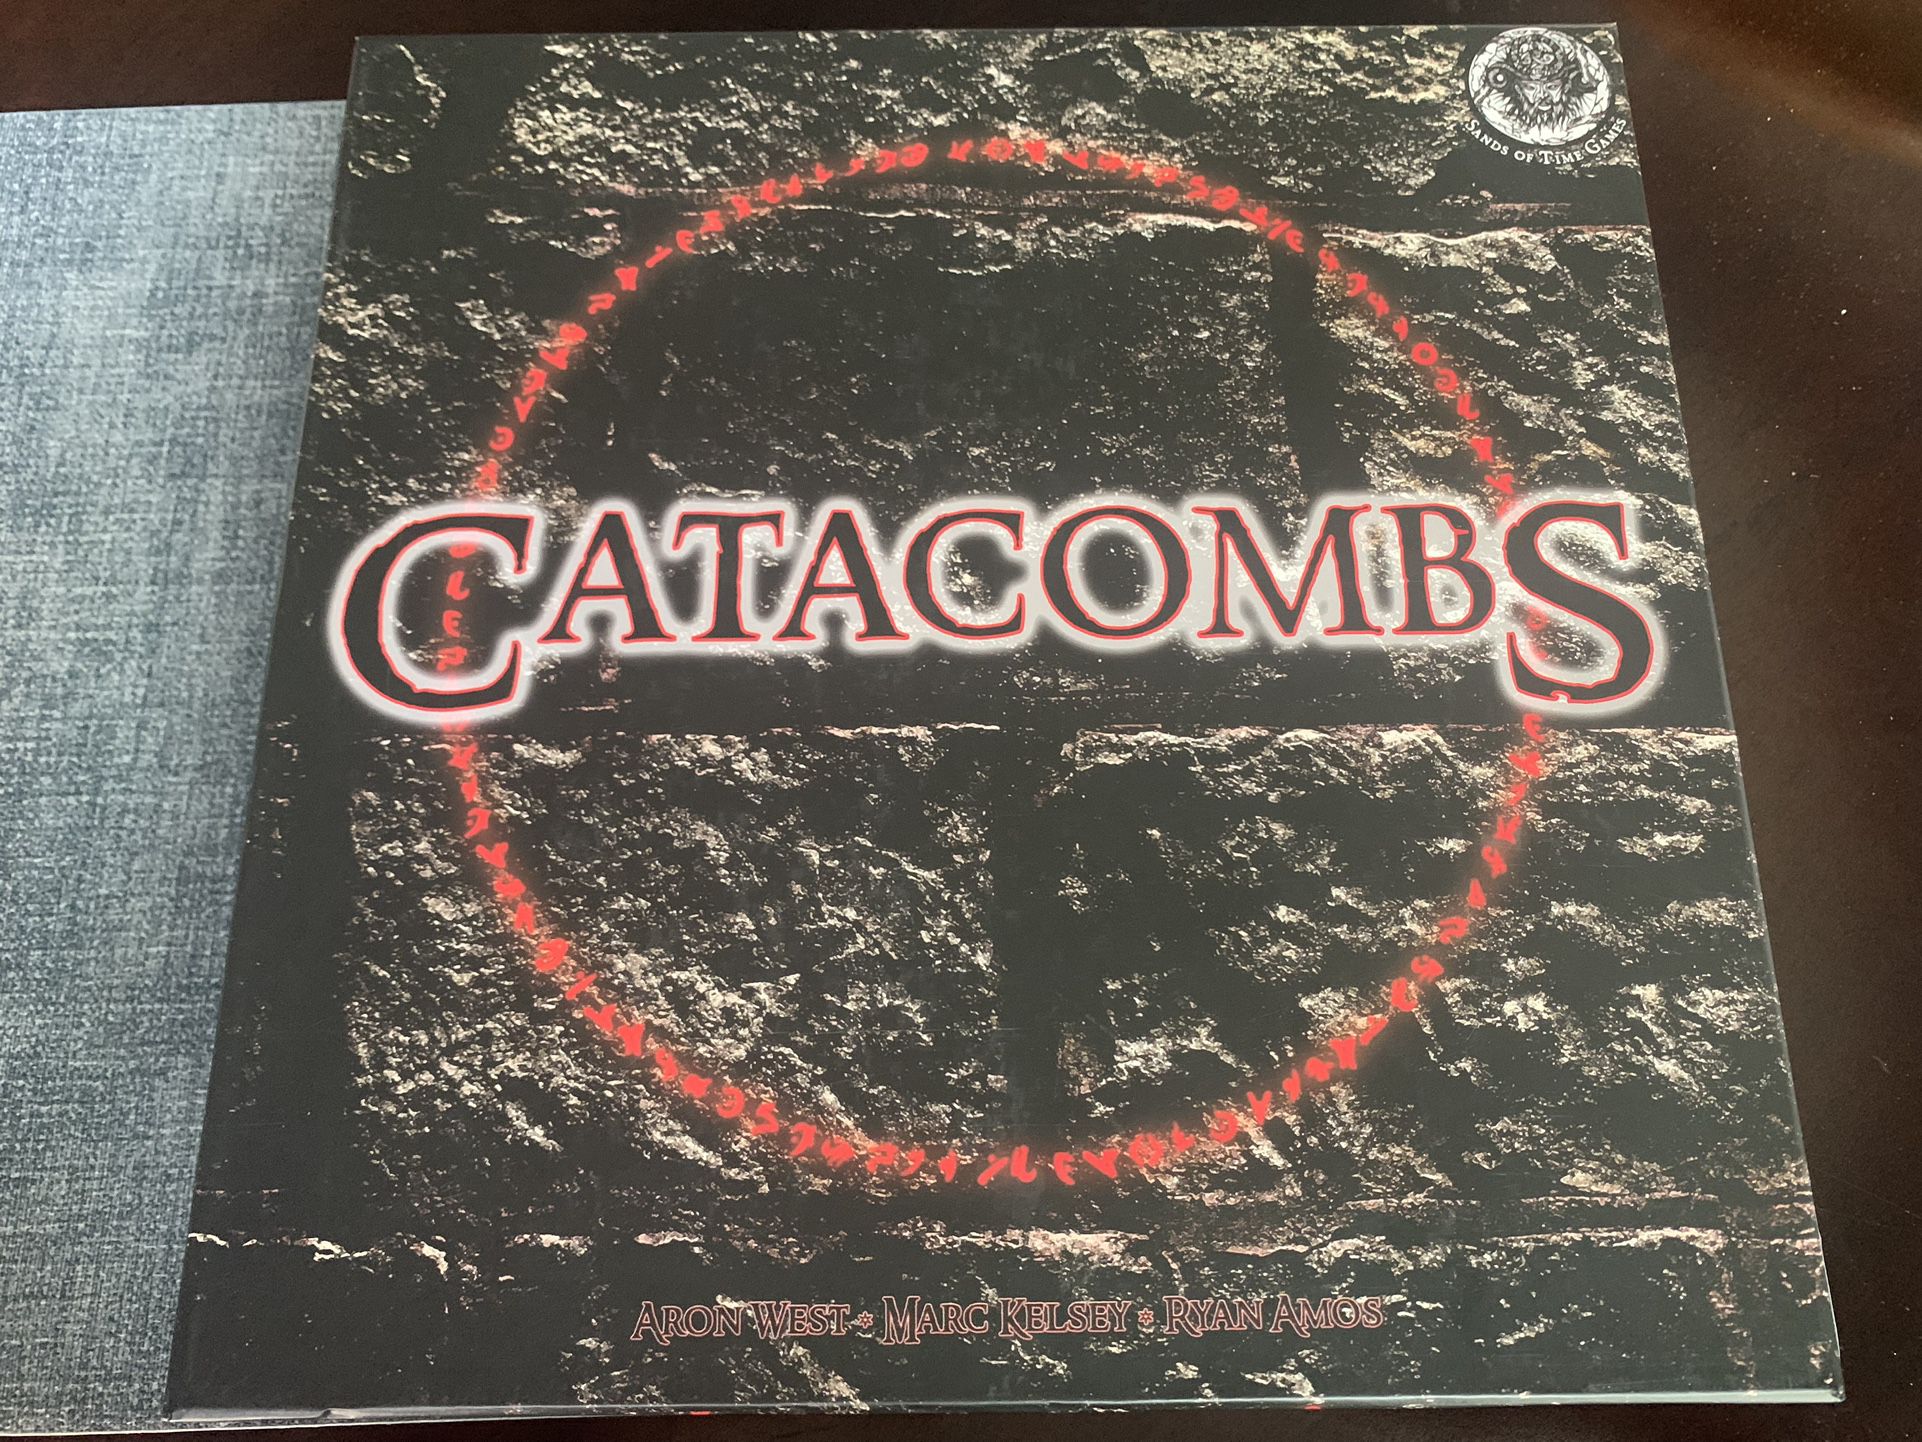 Catacombs board game